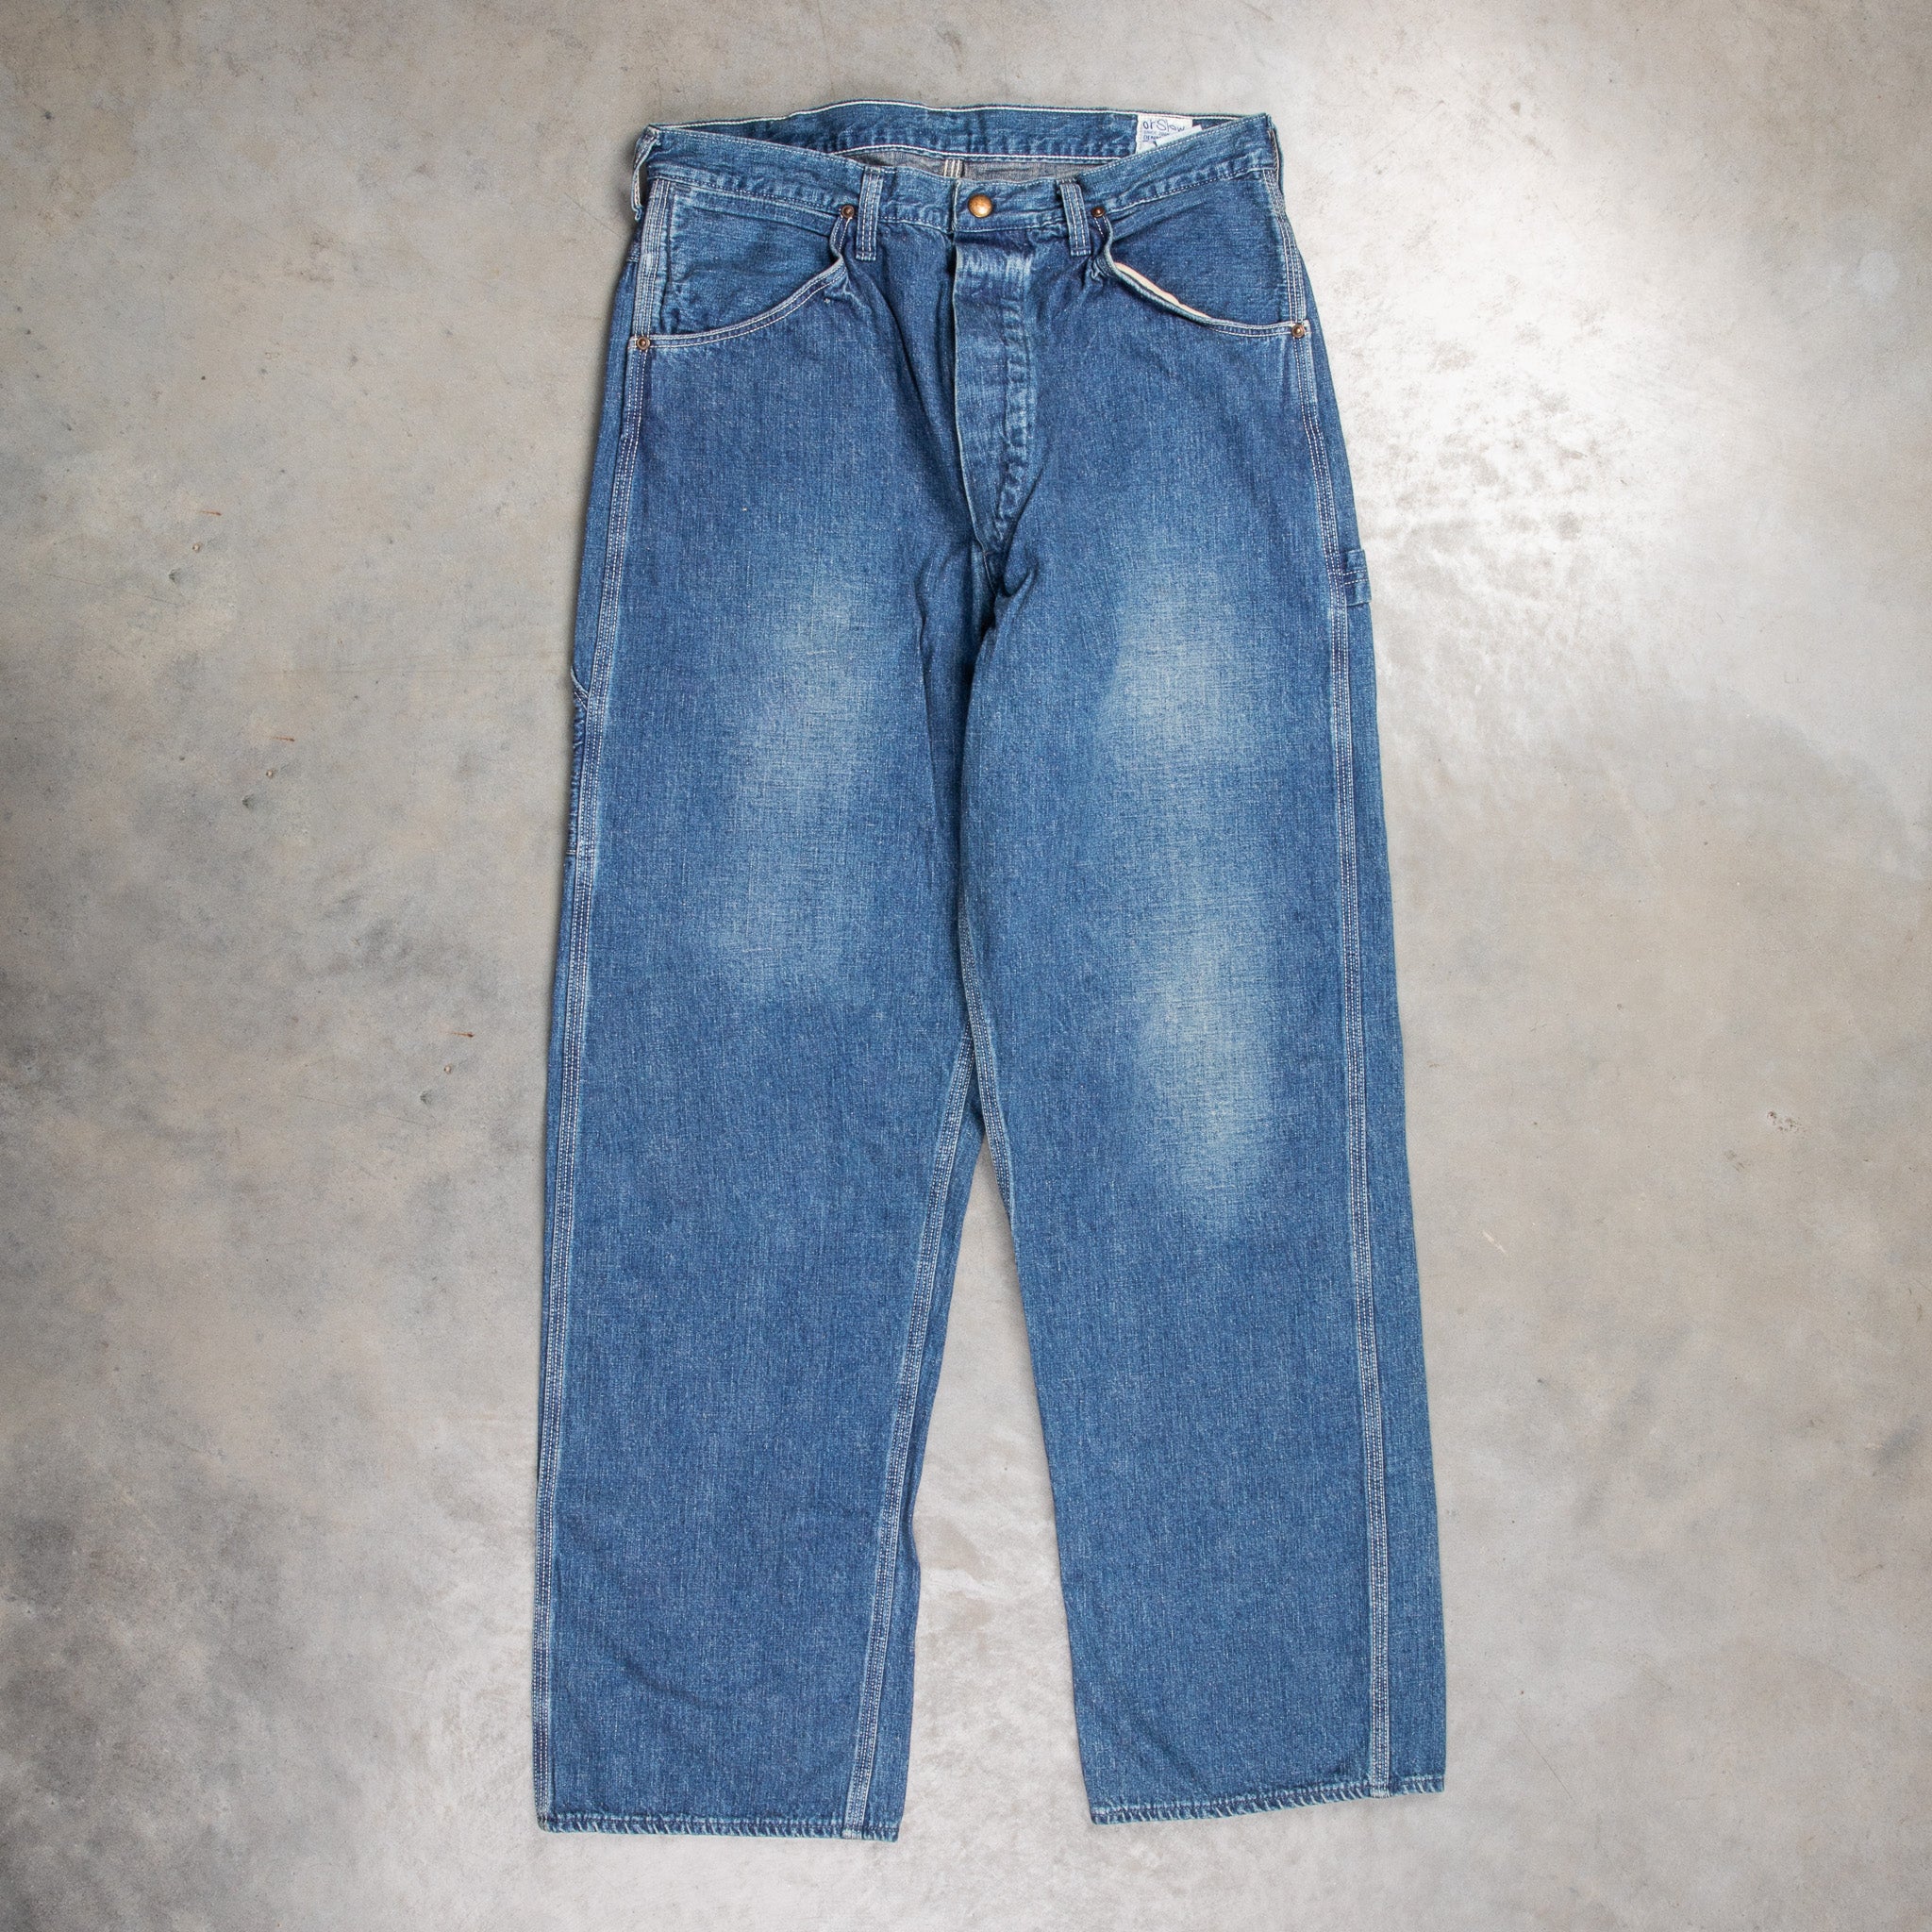 OrSlow Painter Pants 2 Year Wash